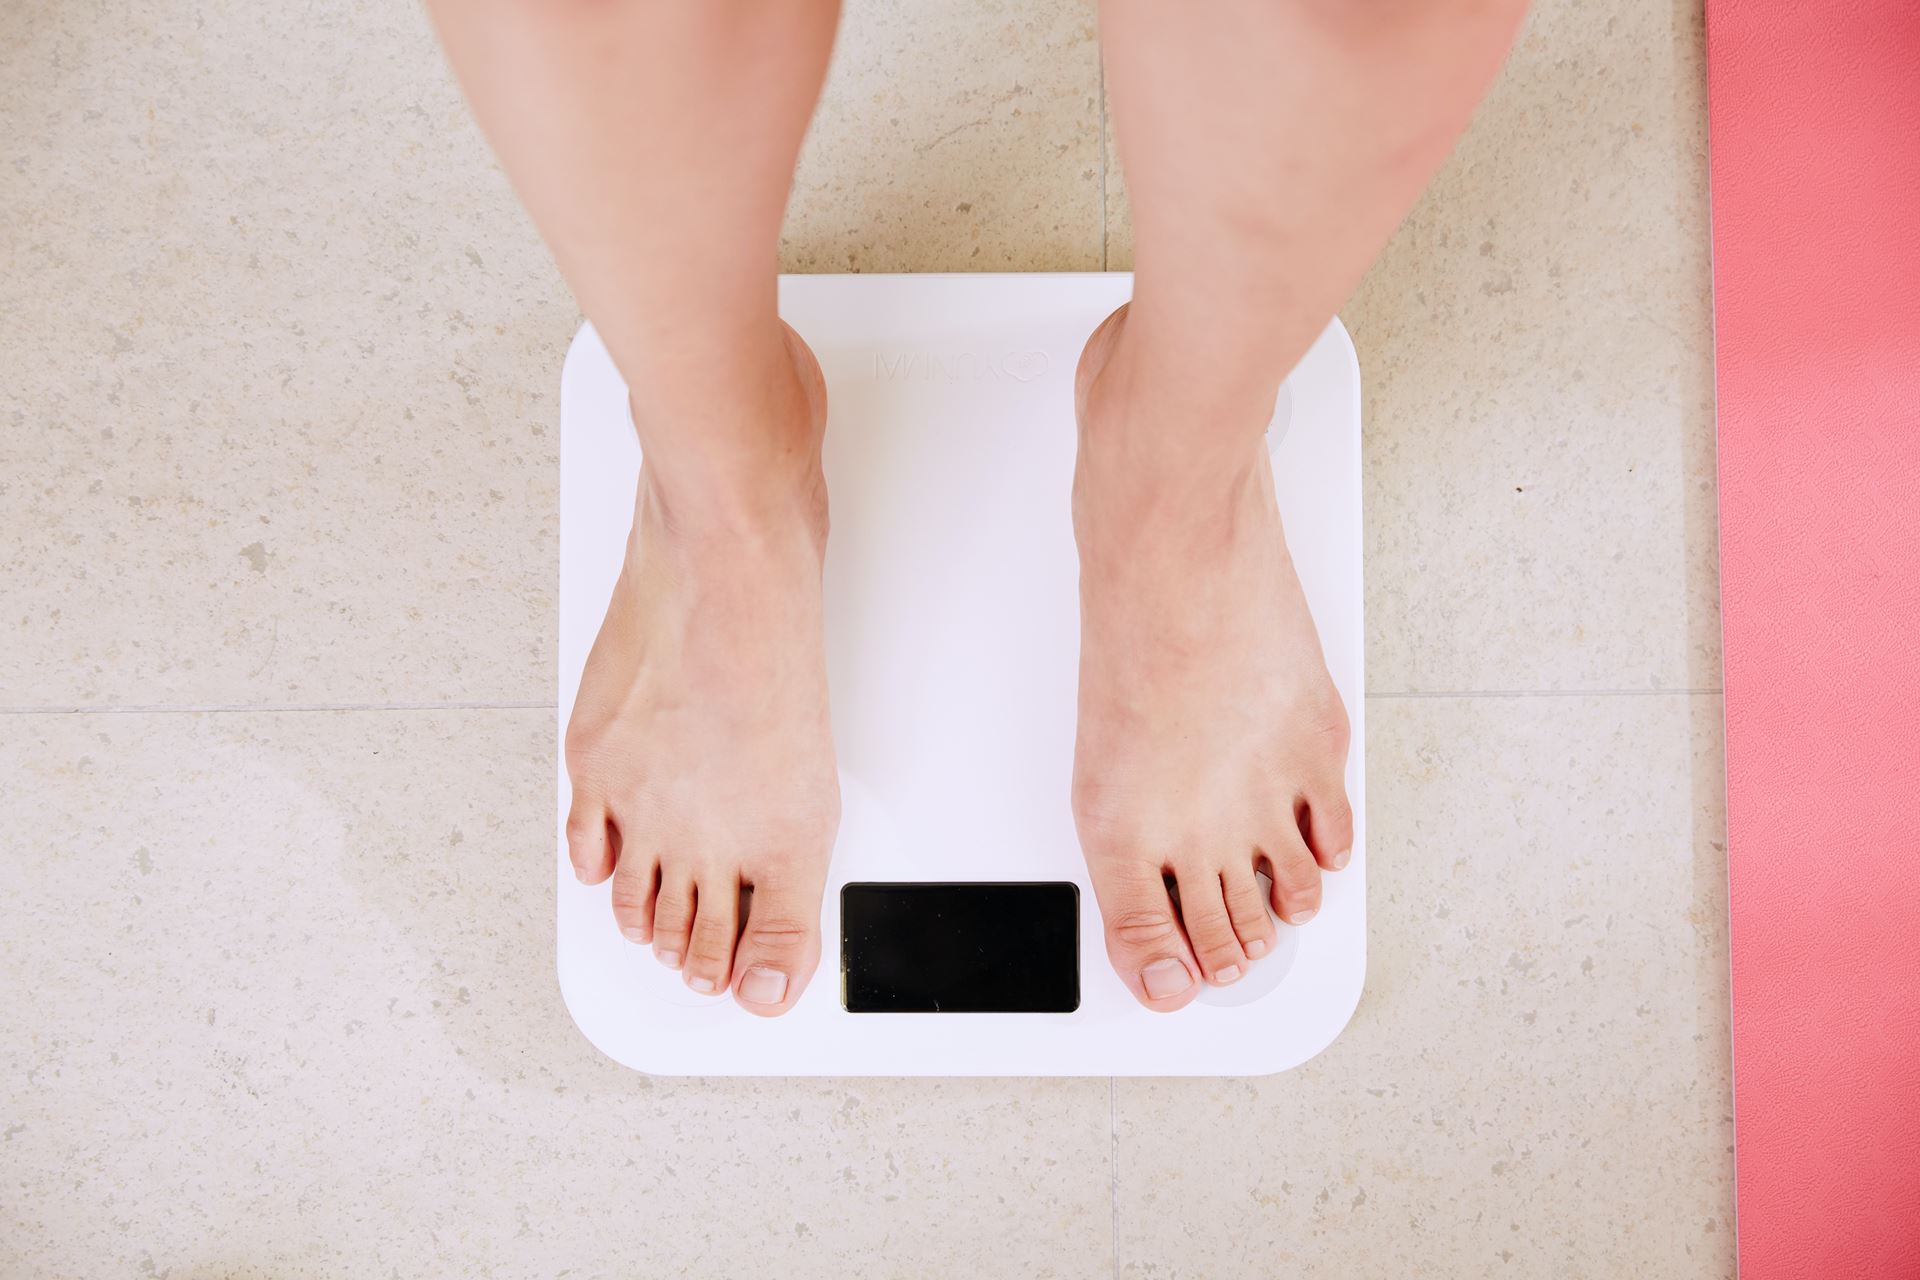 A person standing on scales.